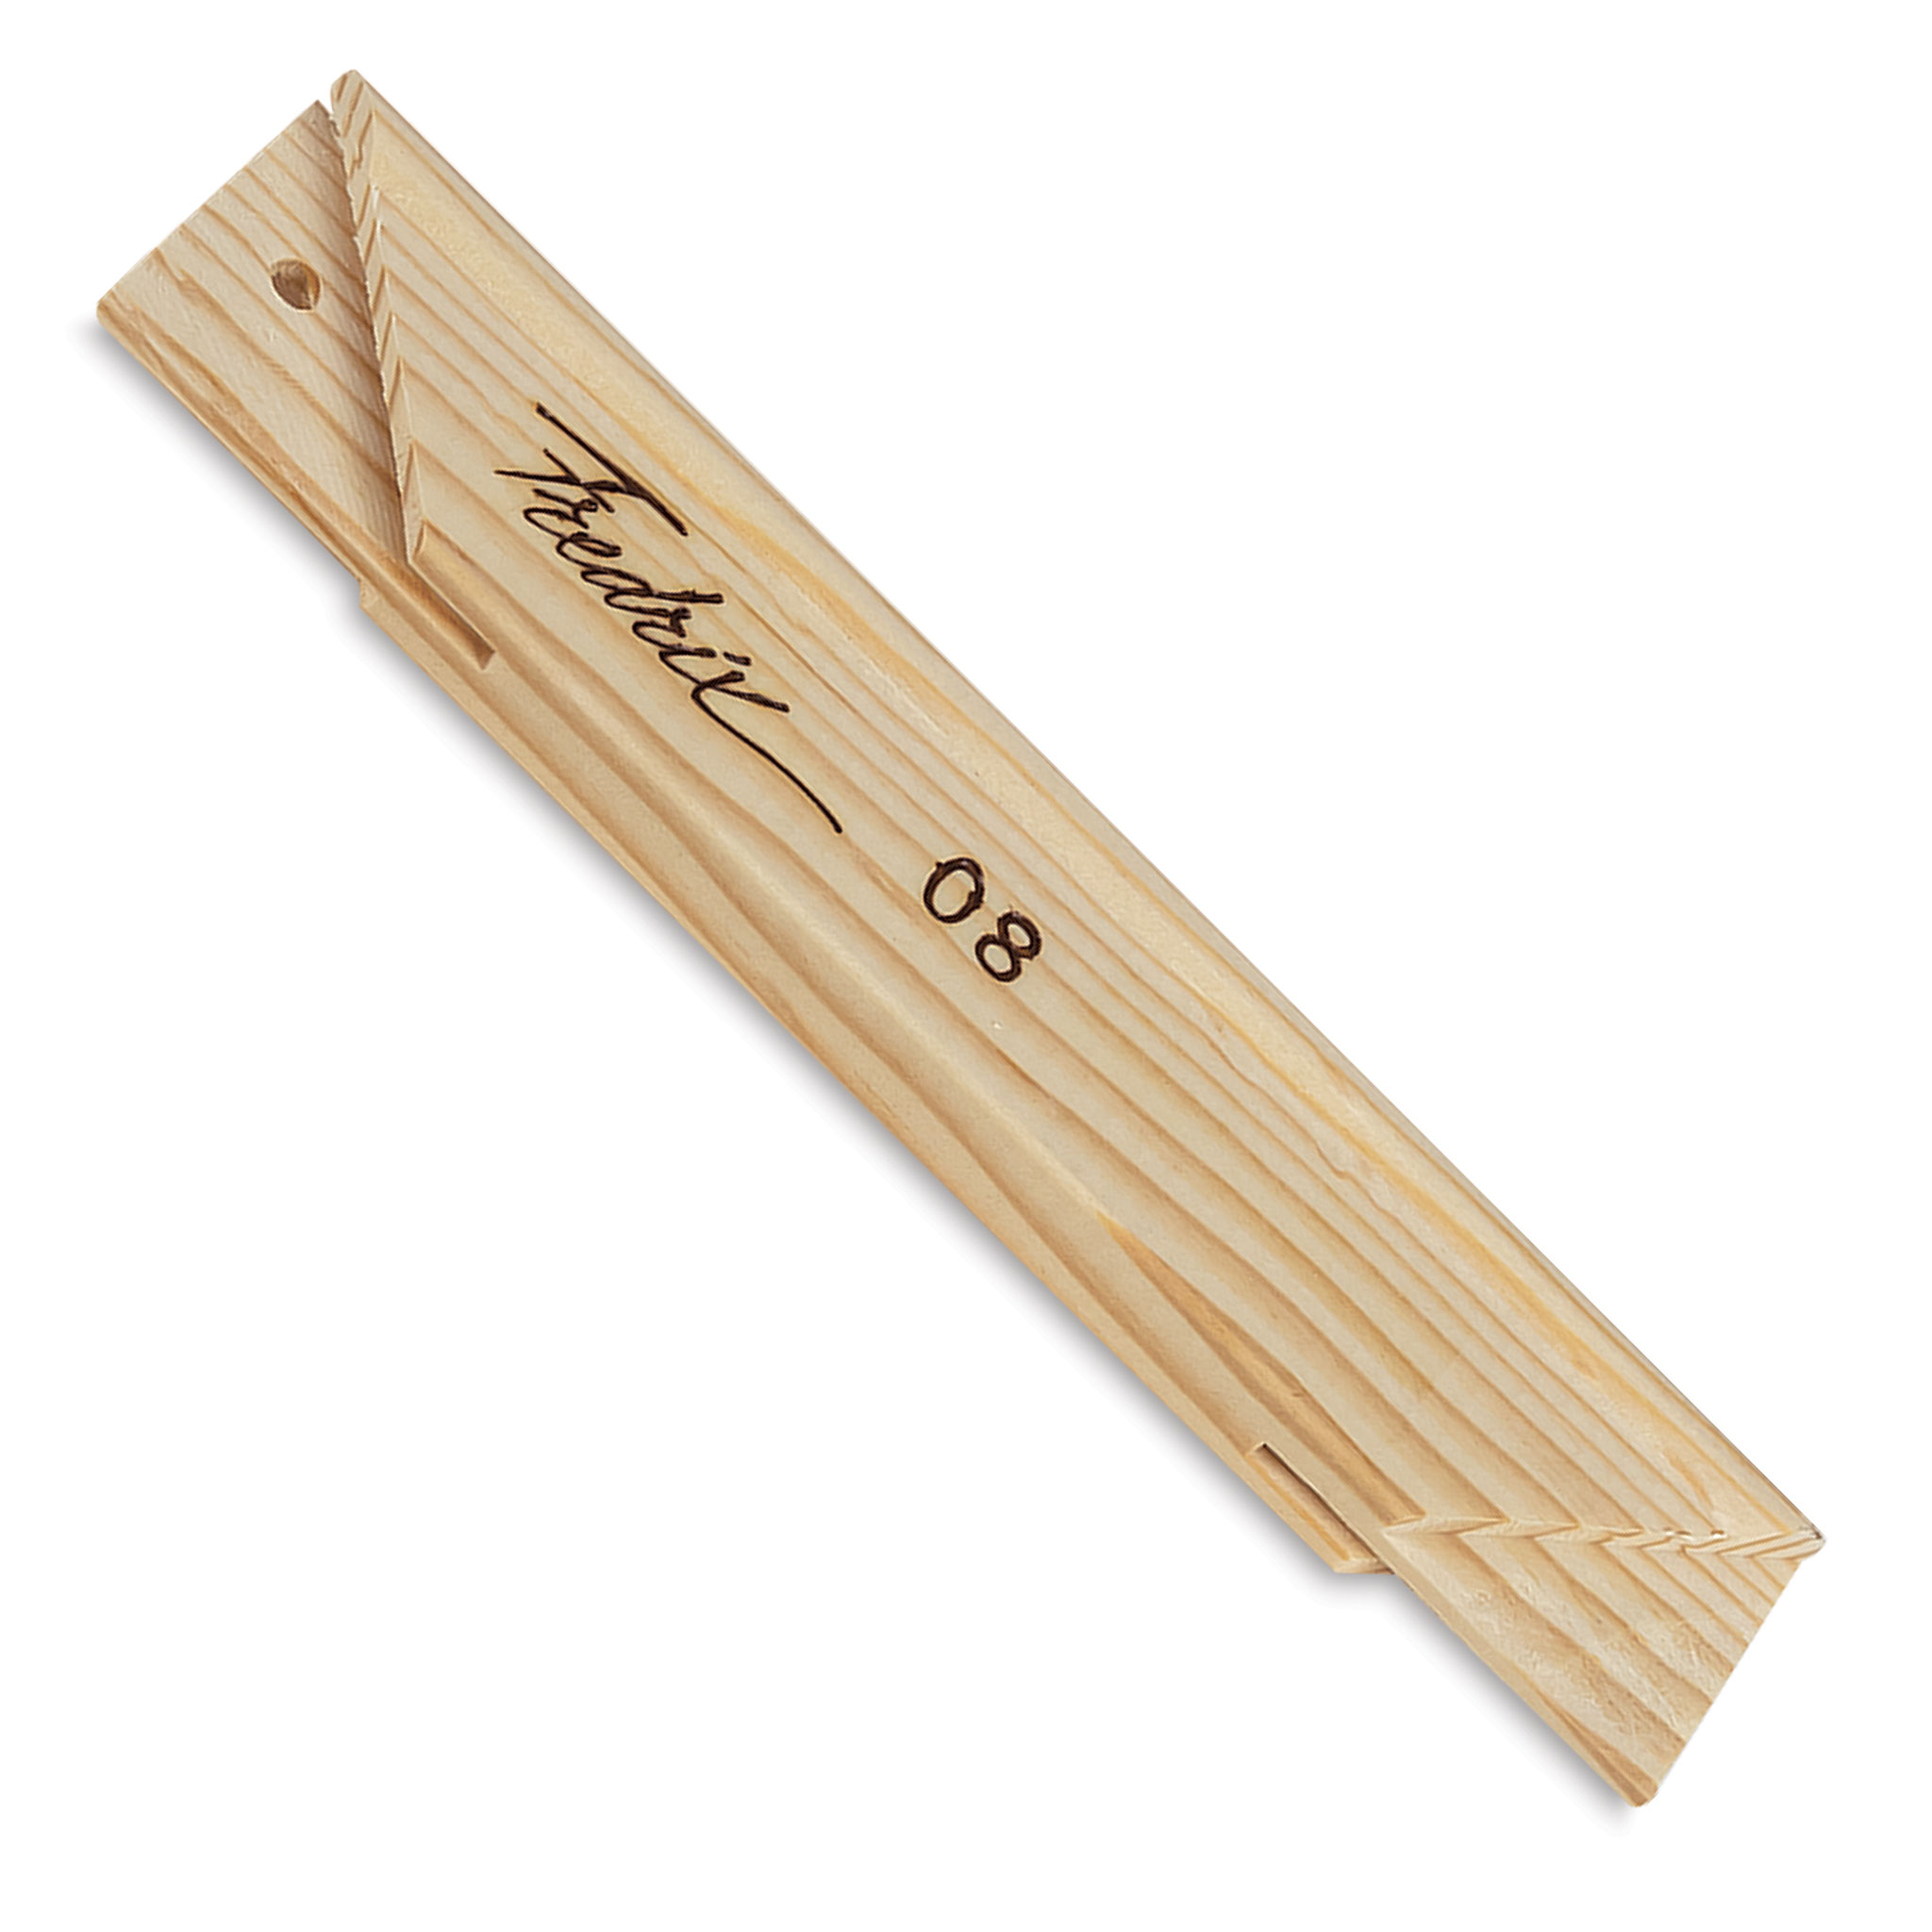 Evertite Stretcher Bars ~ click here for sizes - Parcel rate